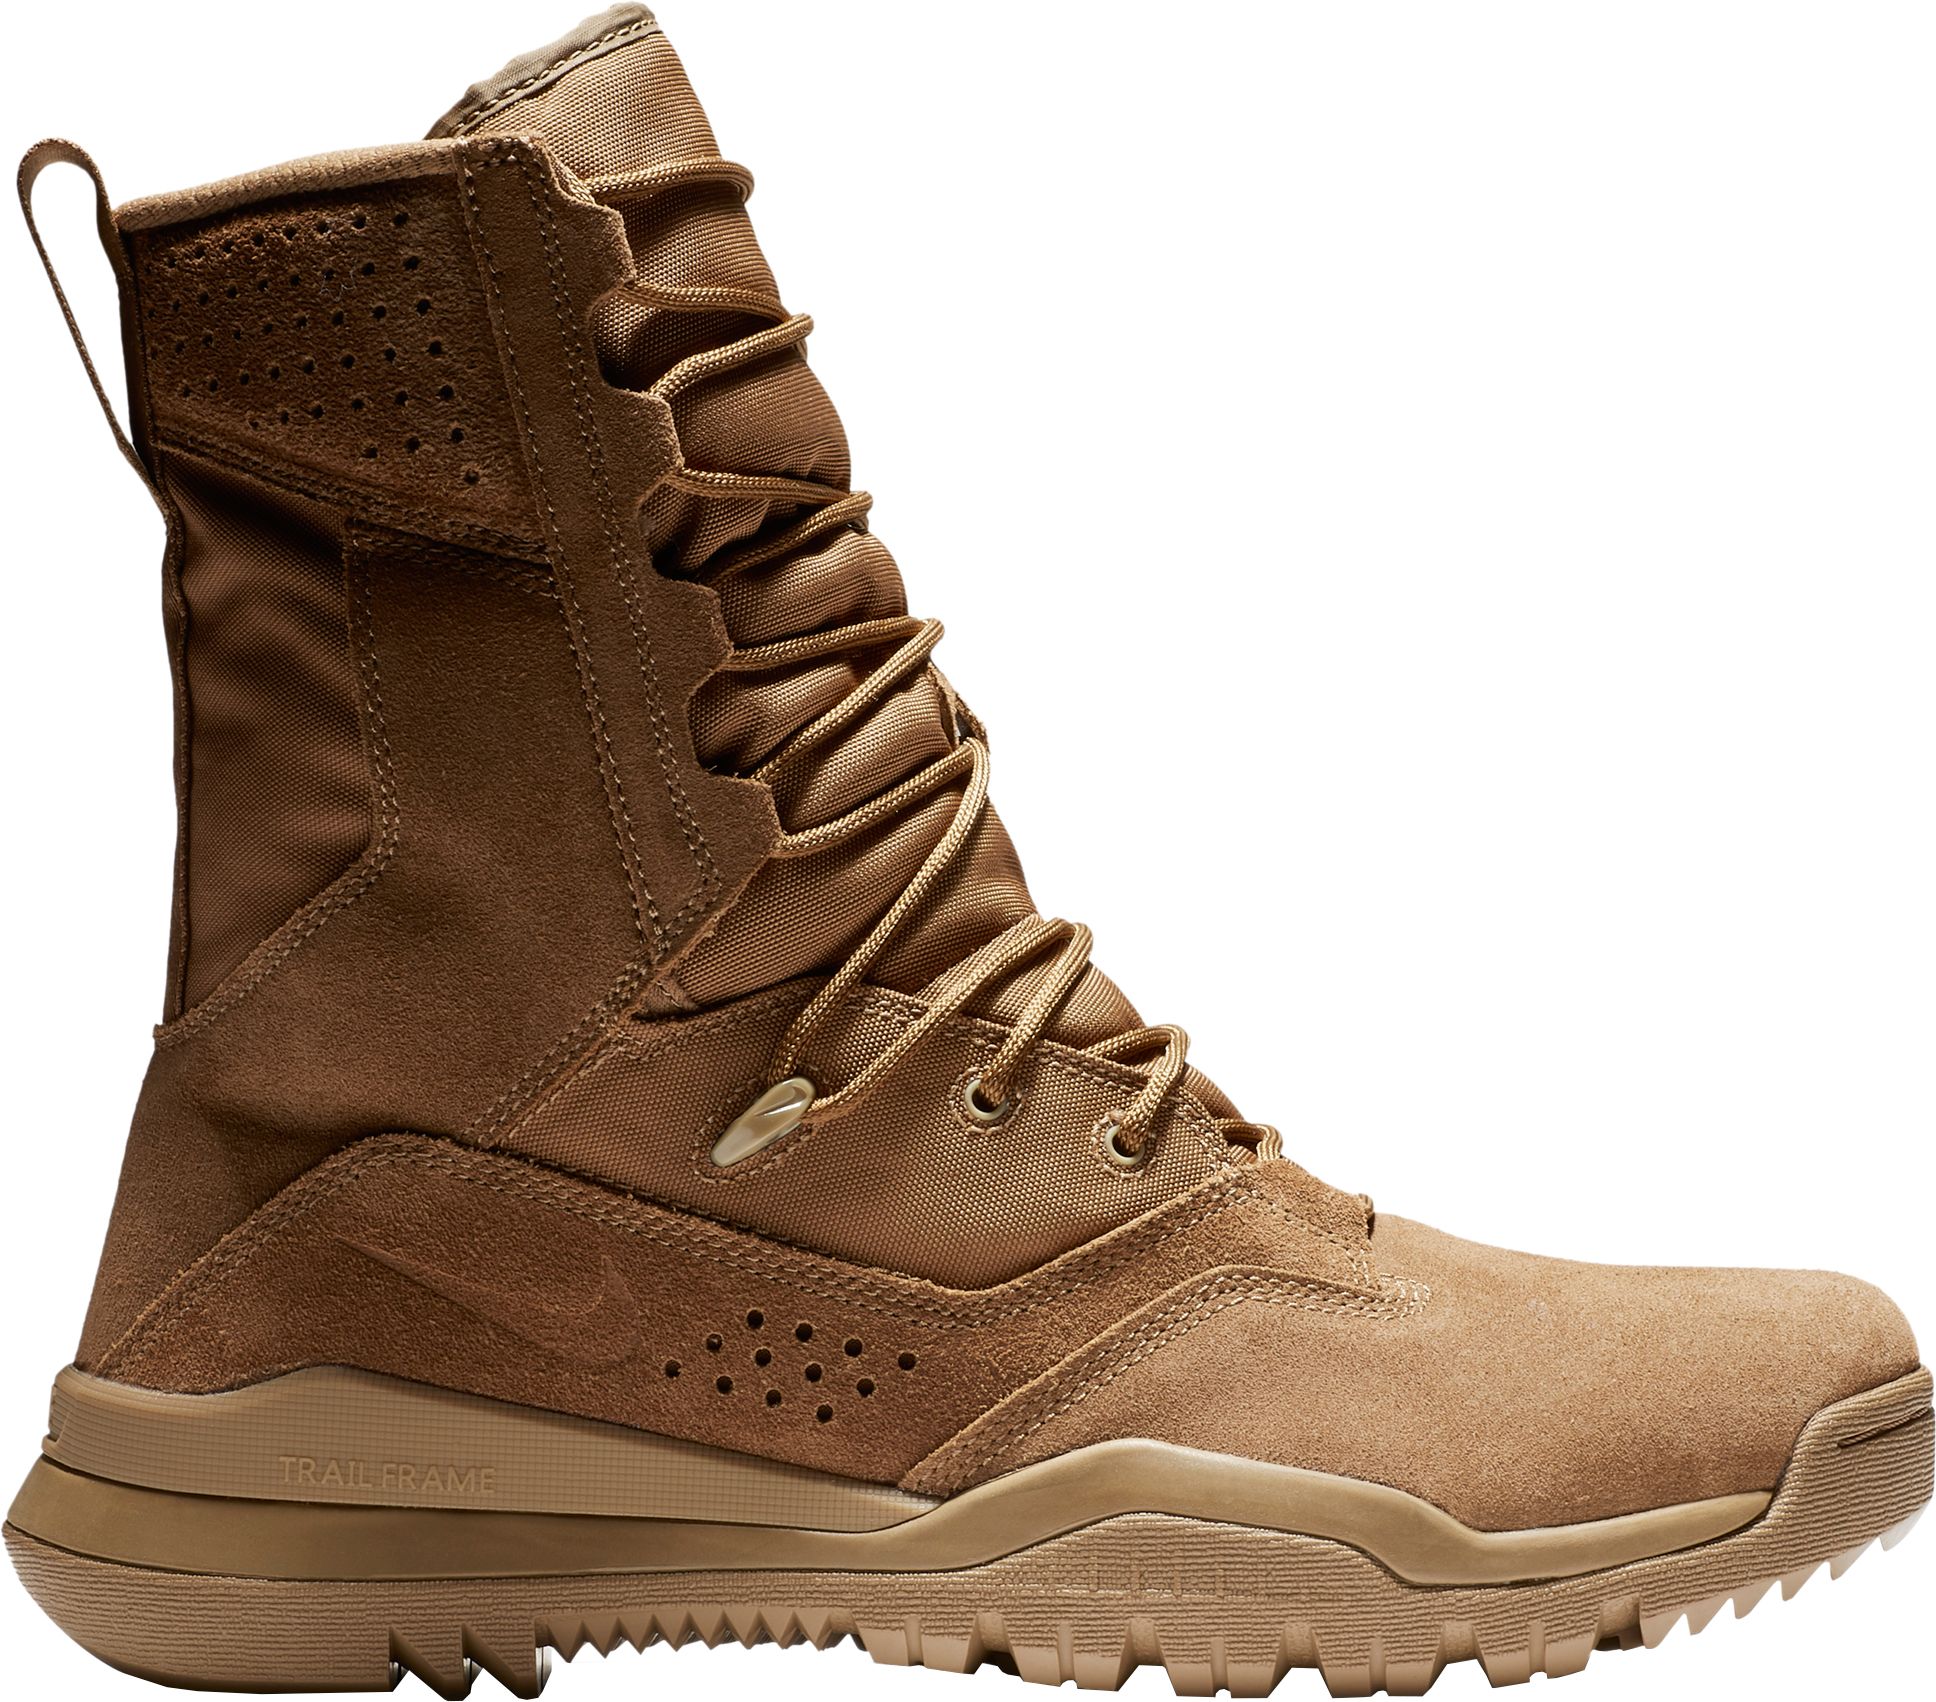 SFB Field 2 8'' Leather Tactical Boots 